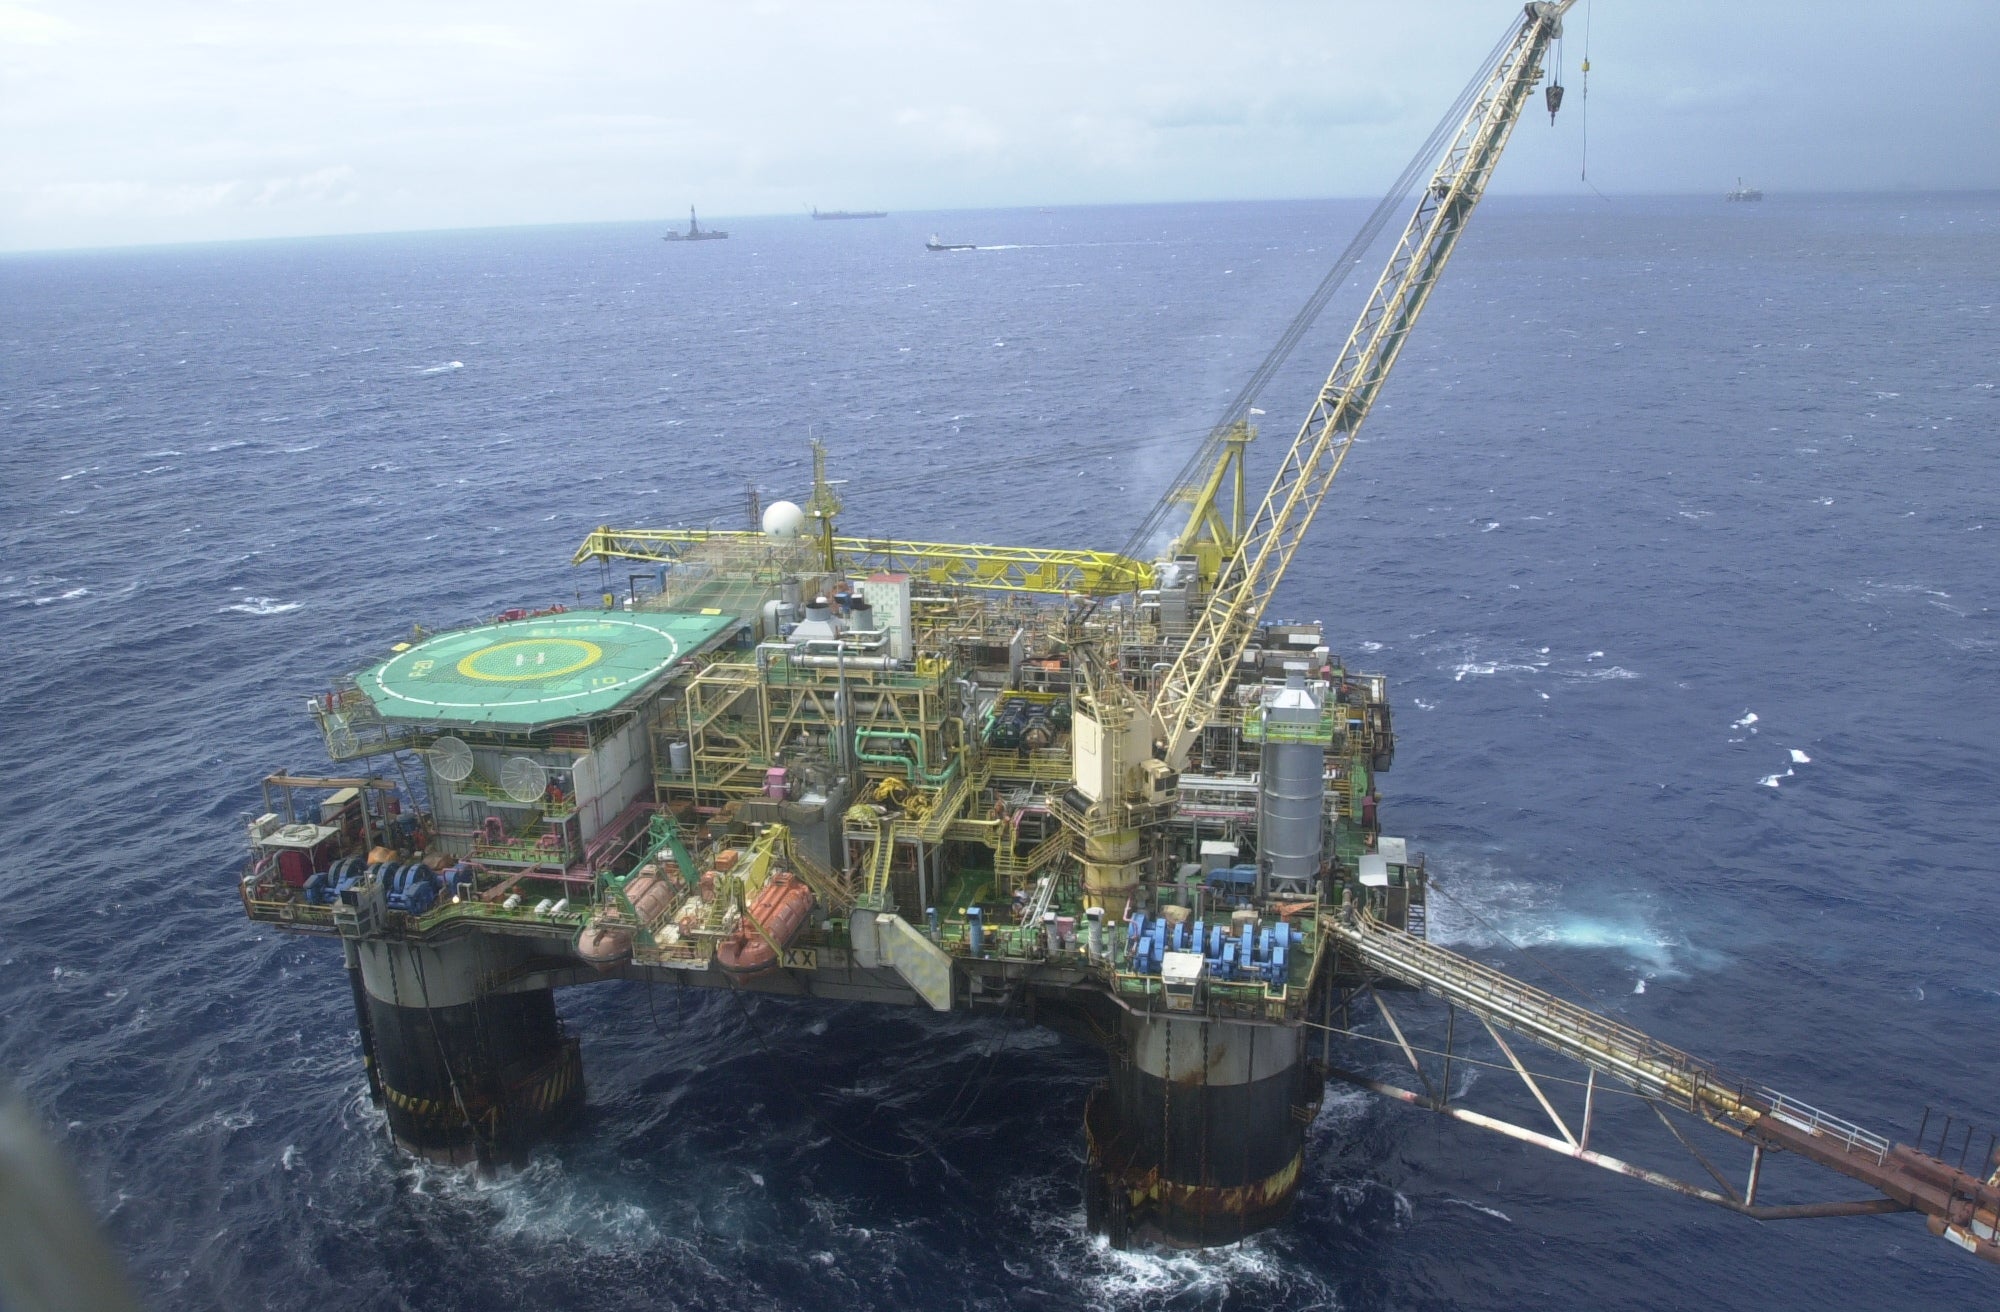 Which countries are driving South America’s offshore oil boom?